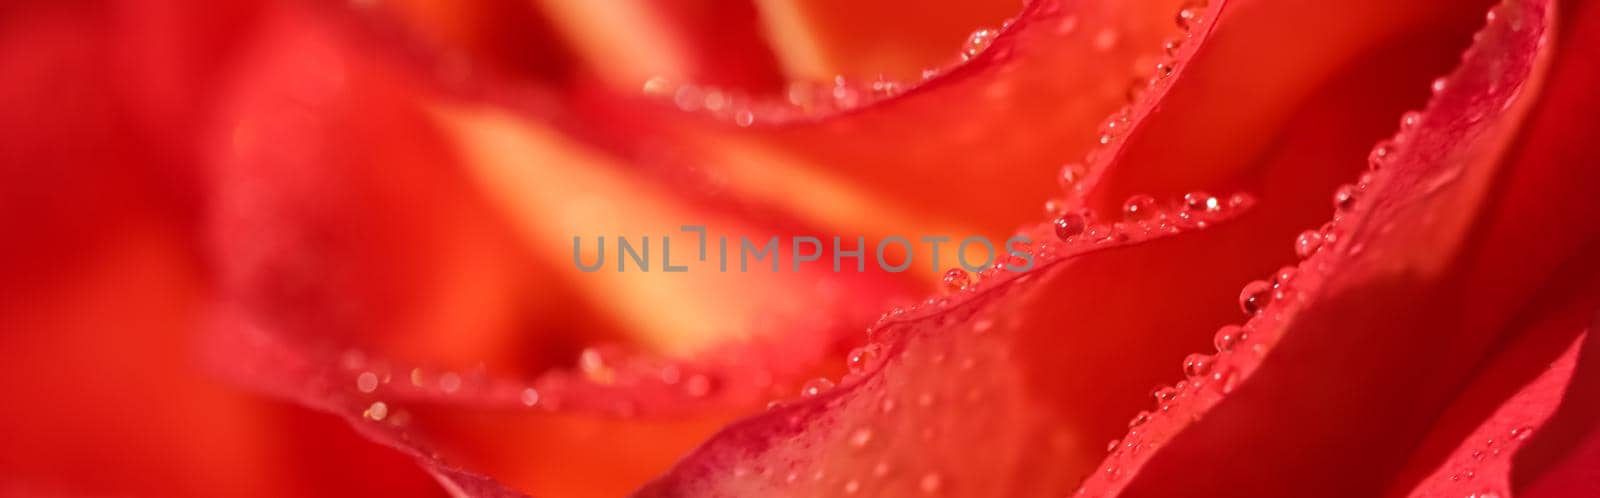 Botanical concept, invitation card - Soft focus, abstract floral background, red rose flower with water drops. Macro flowers backdrop for holiday design